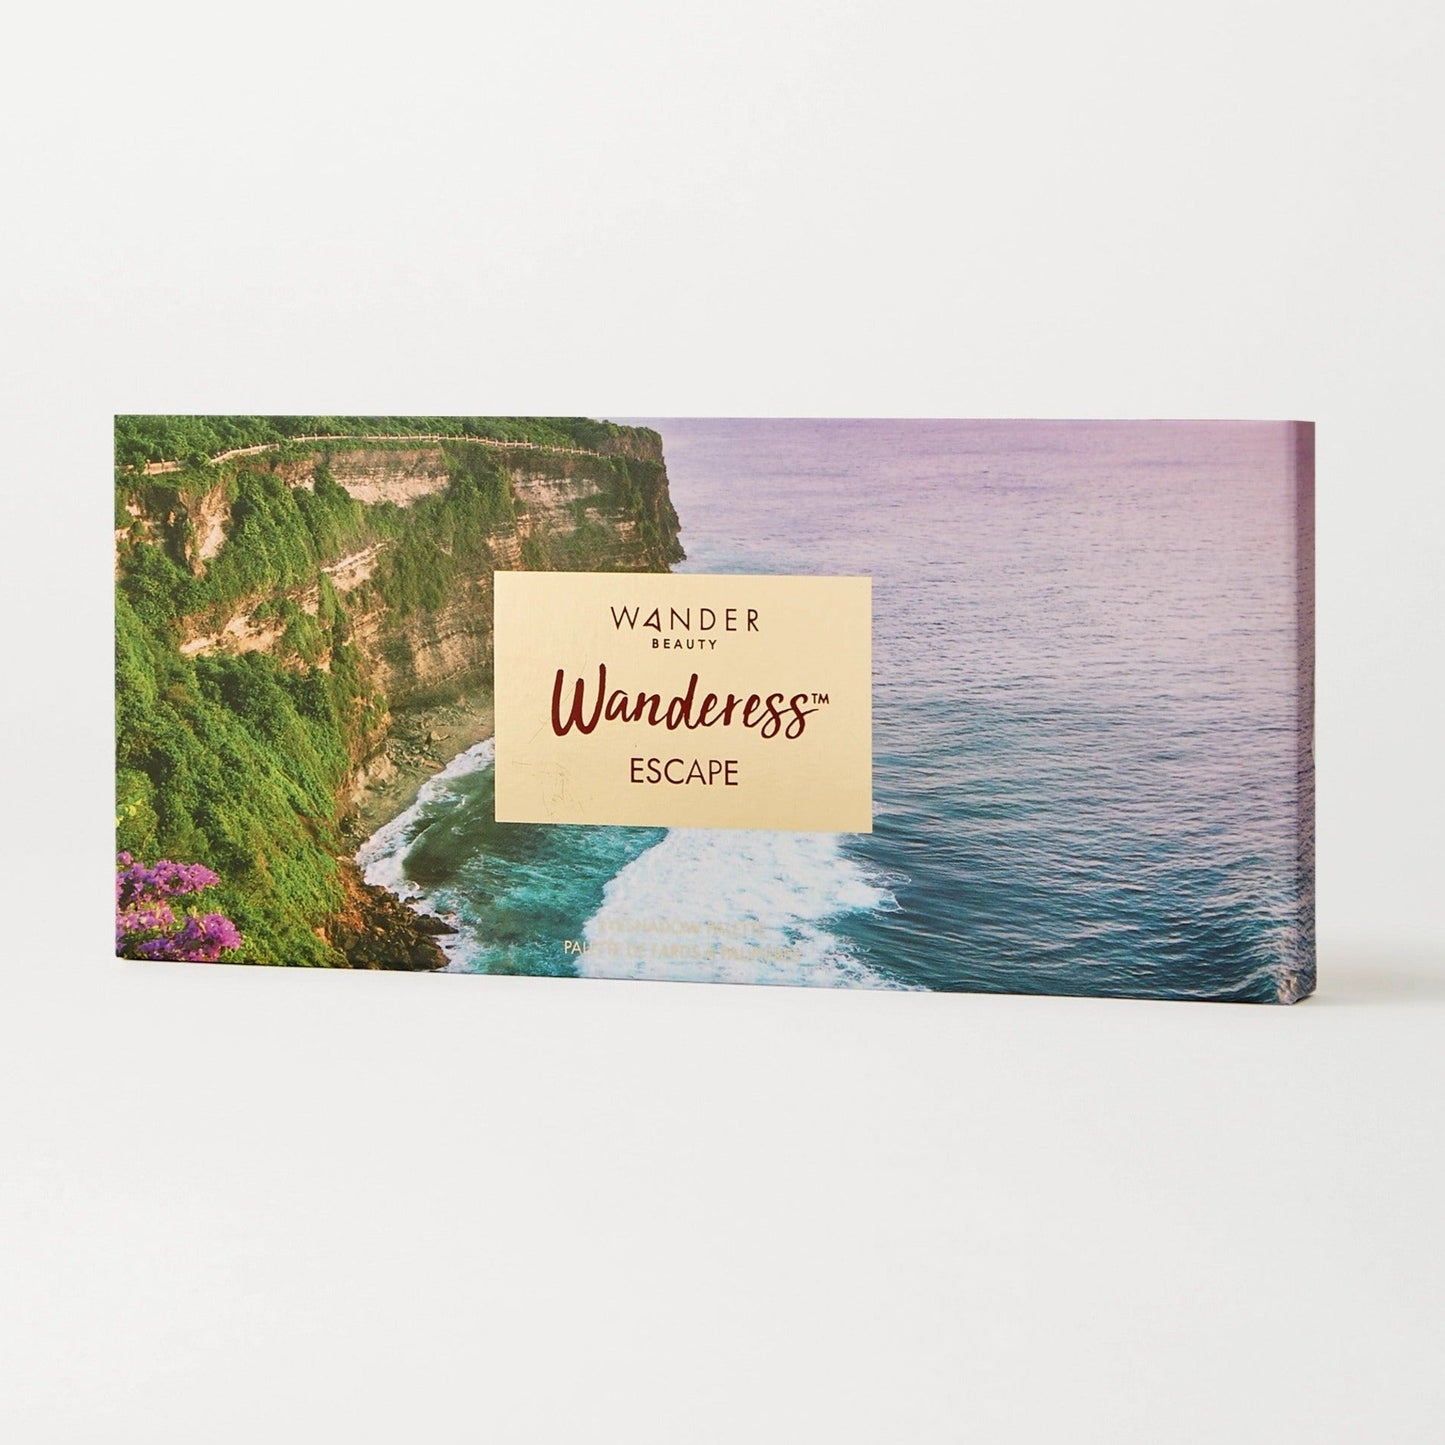 This luxurious eyeshadow palette features a collection of neutral and bold colors for a variety of stunning looks. With a mix of shimmer, satin and matte finishes, let these shades inspire your next escape and spark your wanderlust. Wander beauty eyeshadow palette